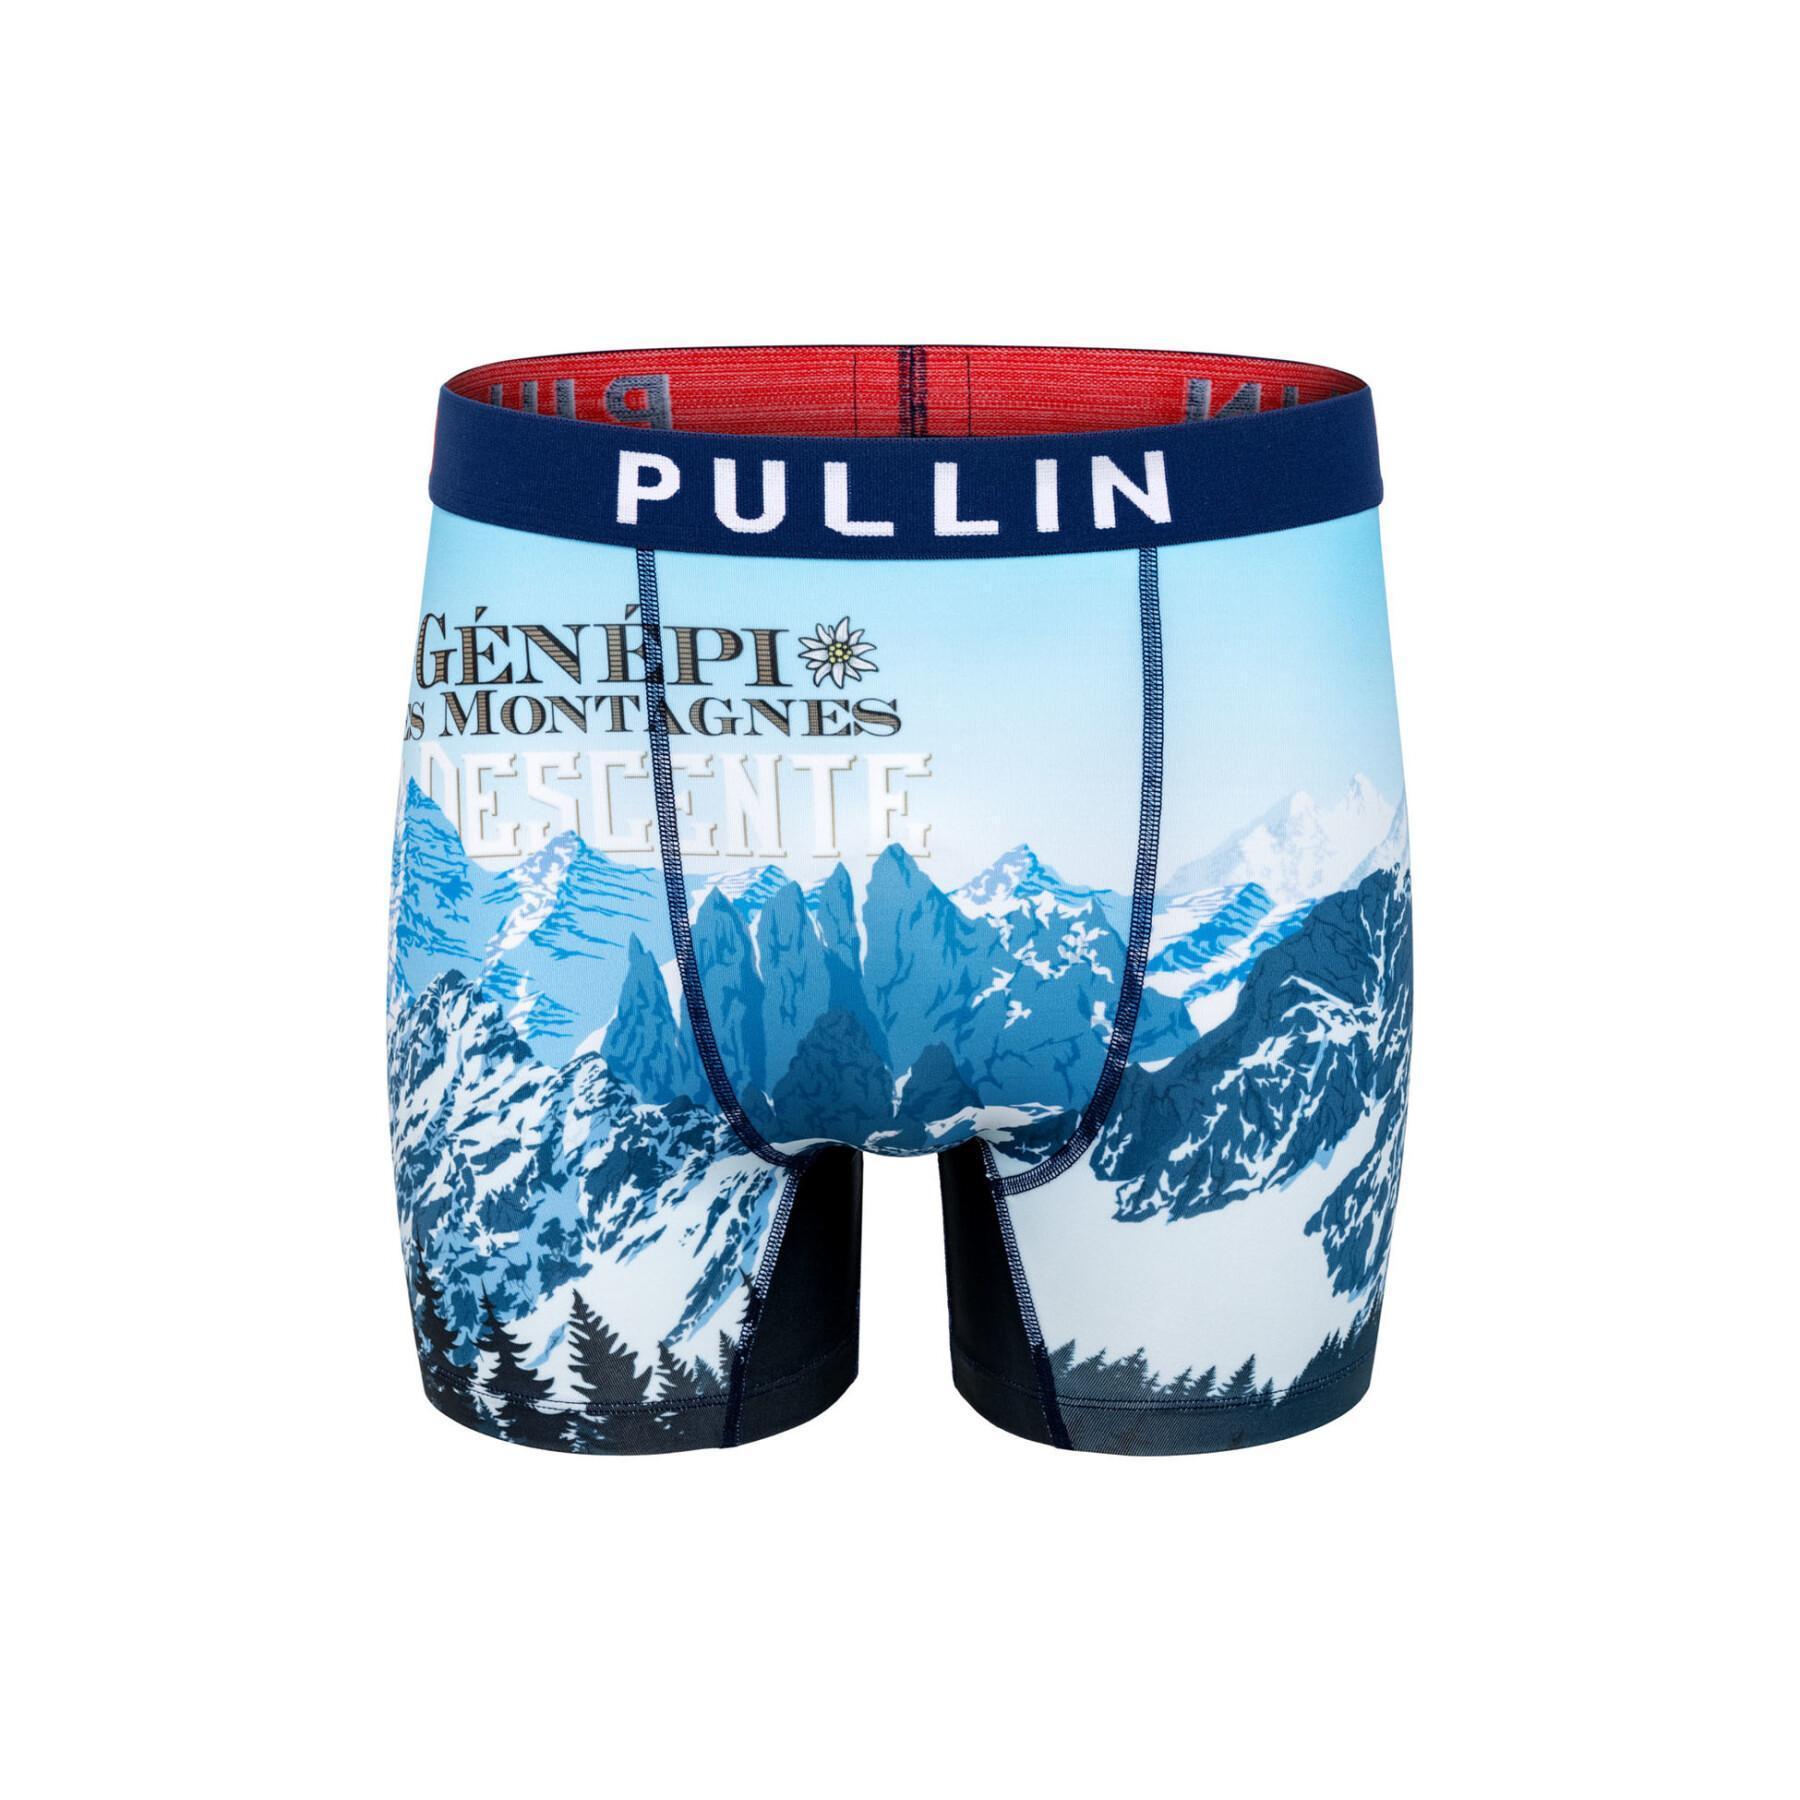 Boxershorts Pull-in fashion 2 ladescente